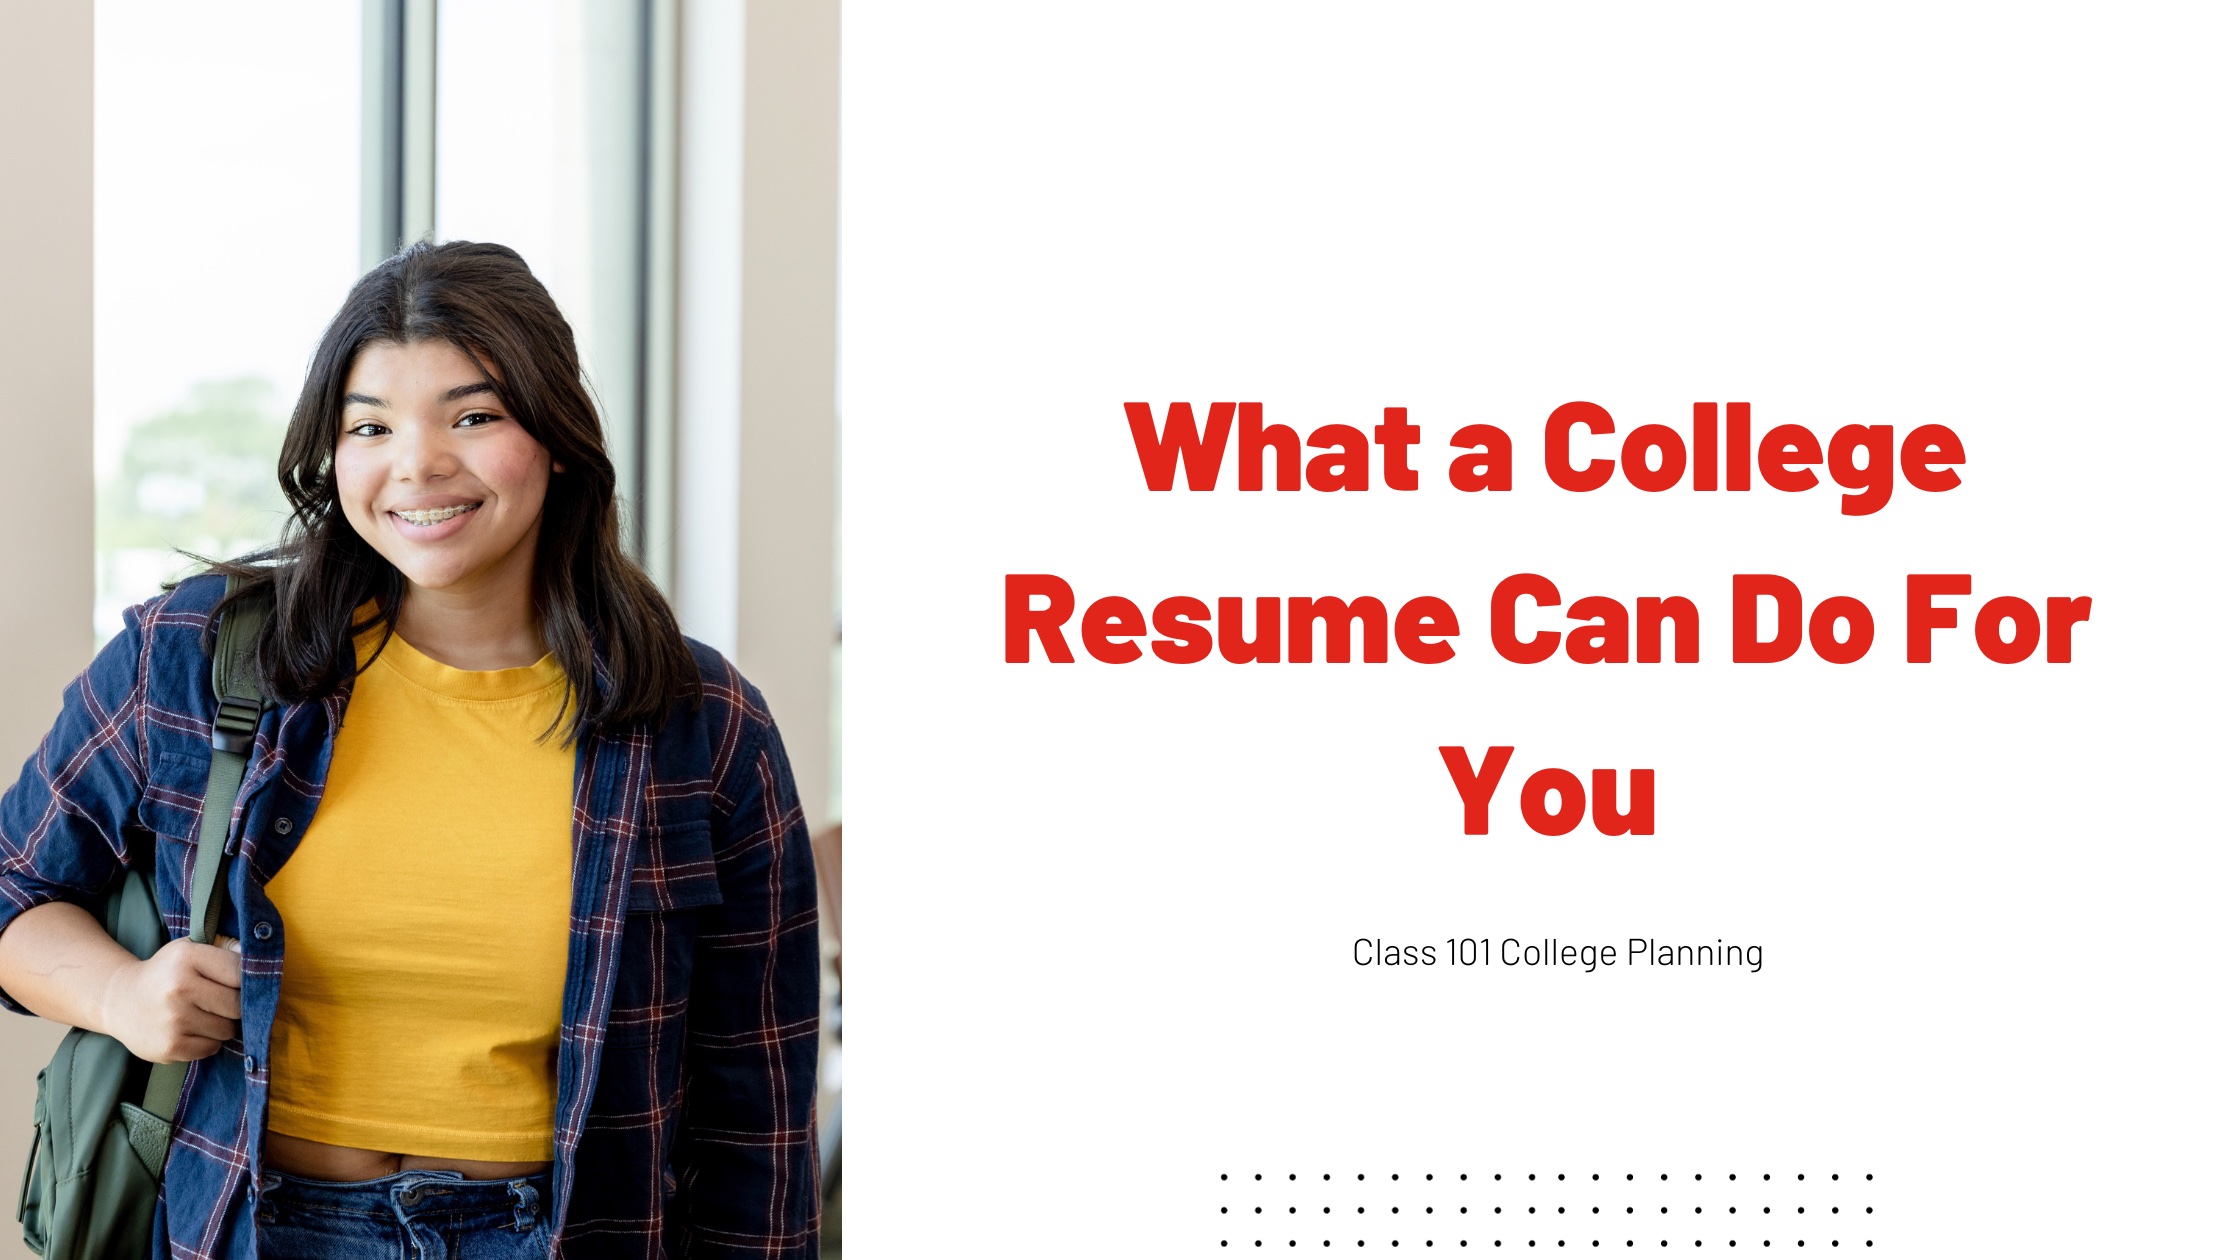 What a College Resume Can Do For You